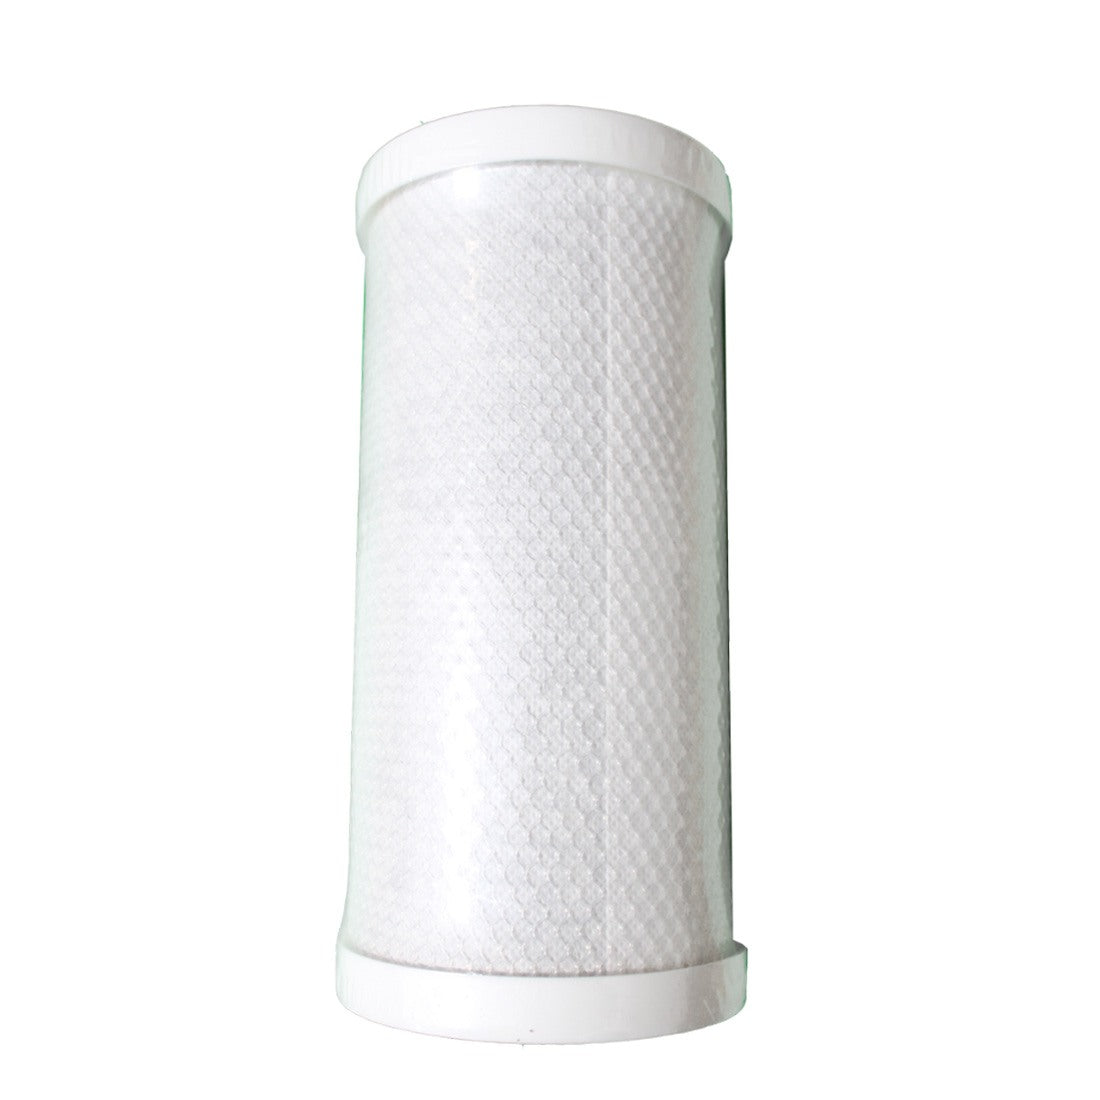 XERO Carbon Filter - 4 Inch x 10 Inch - Upright Front View